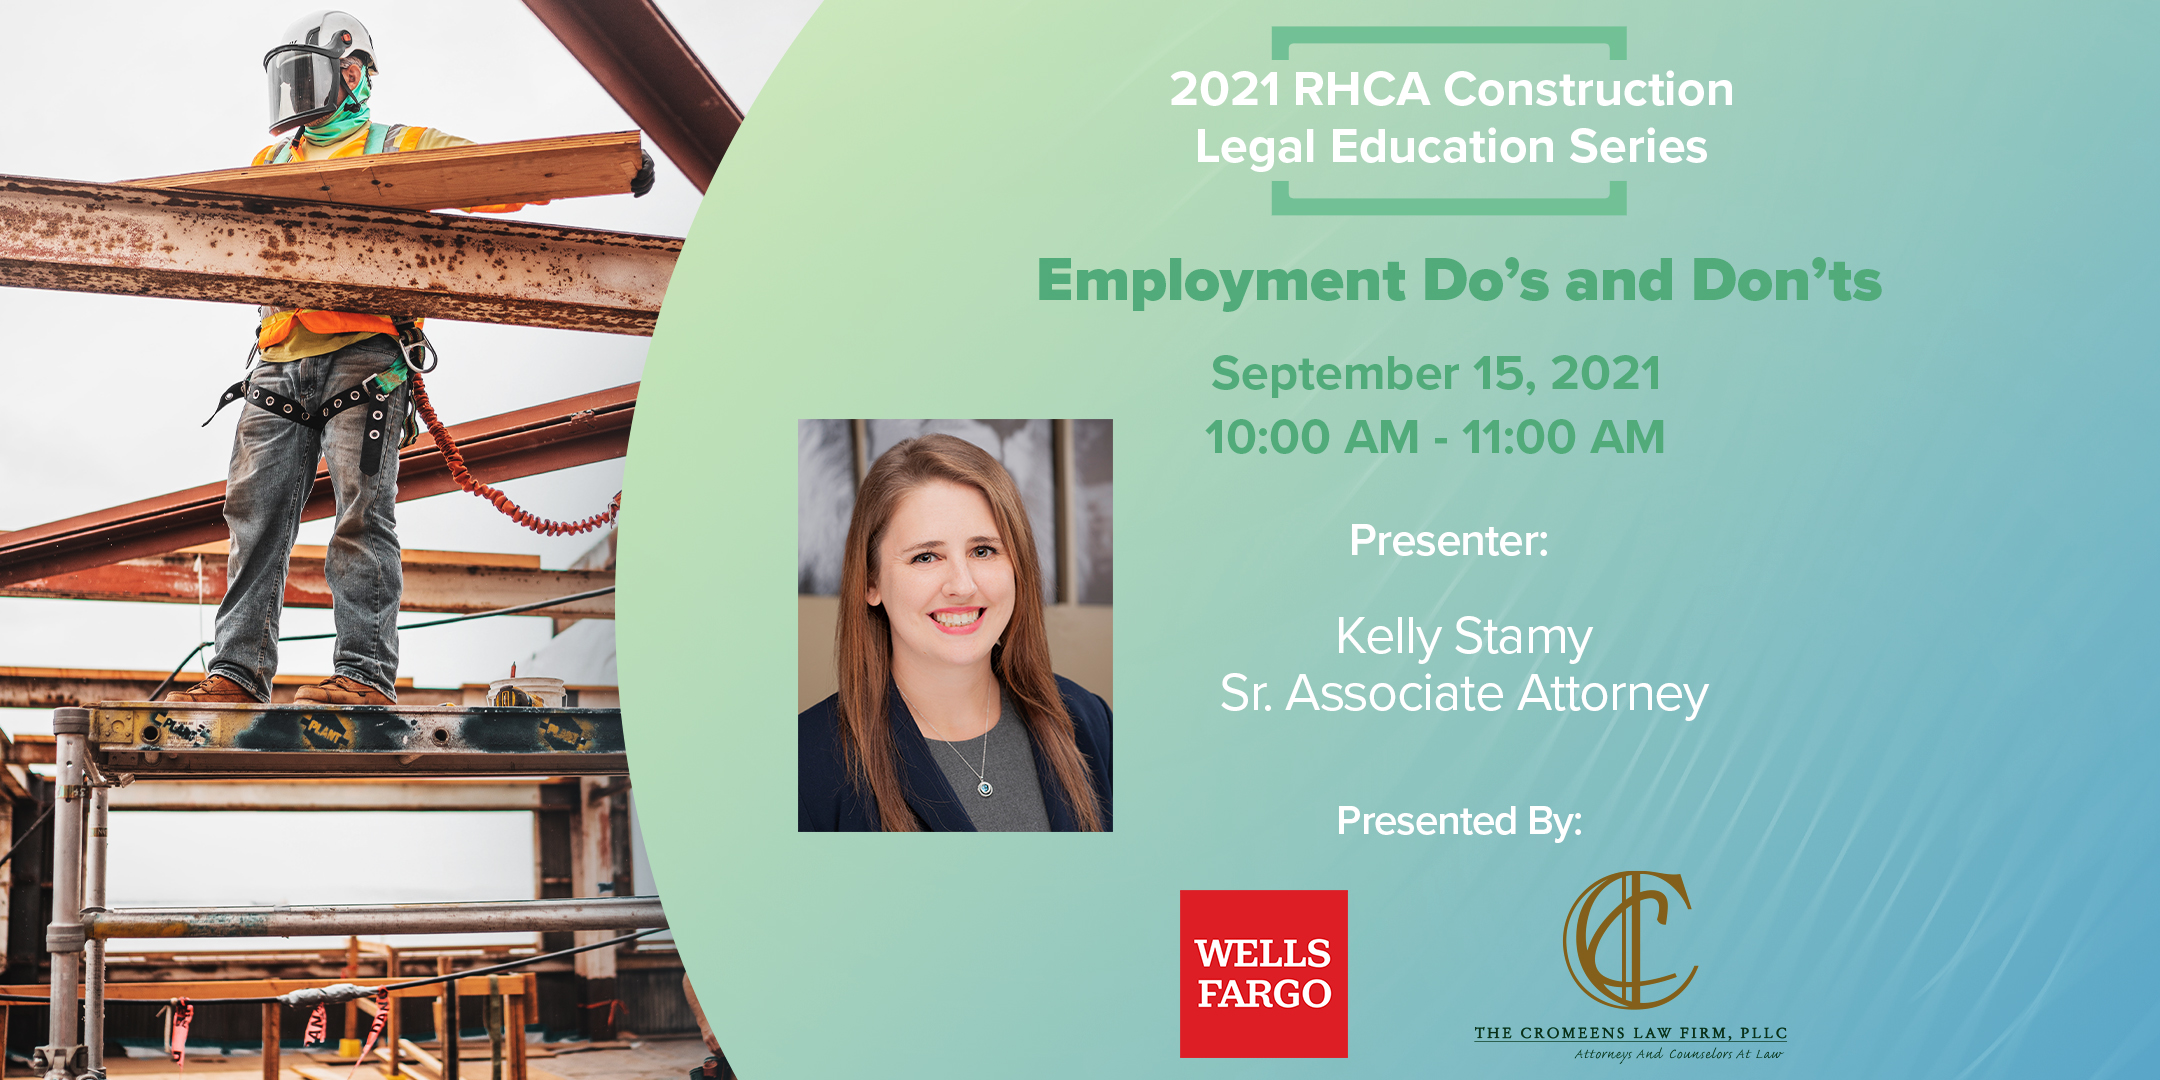 Employment Do’s and Don’ts Webinar with RHCA